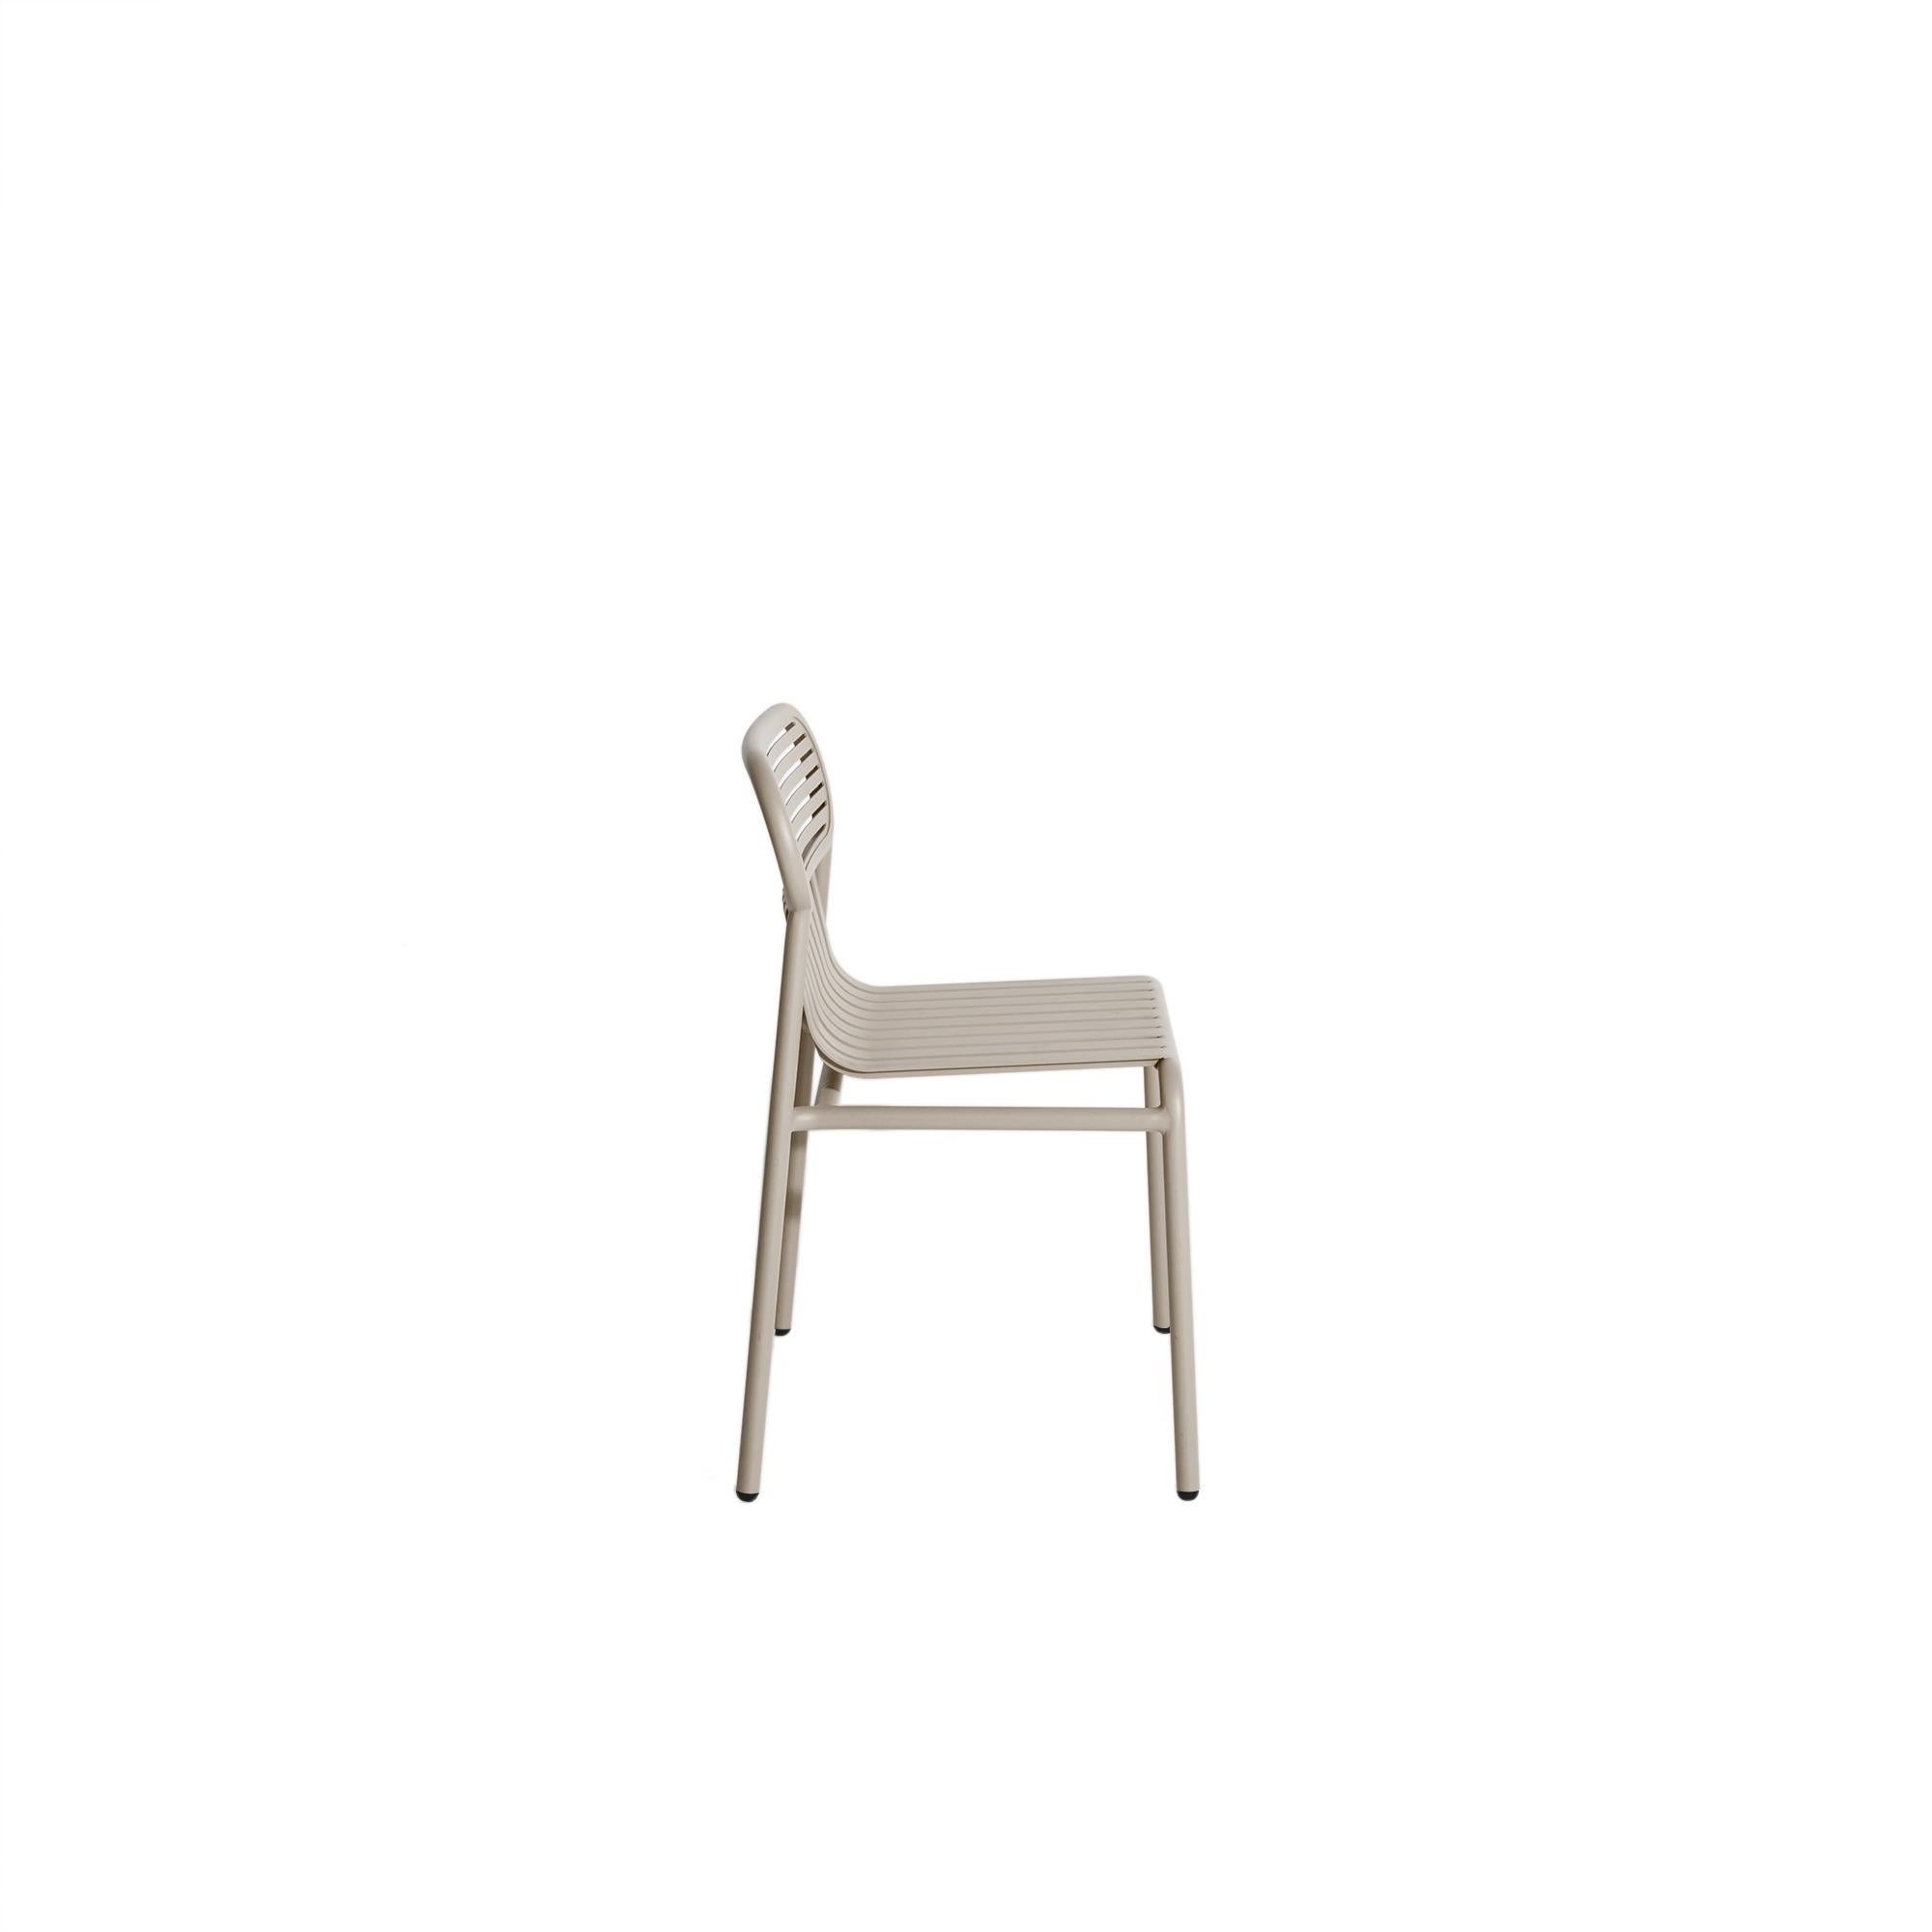 Chinese Petite Friture Week-End Chair in Dune Aluminium by Studio BrichetZiegler For Sale